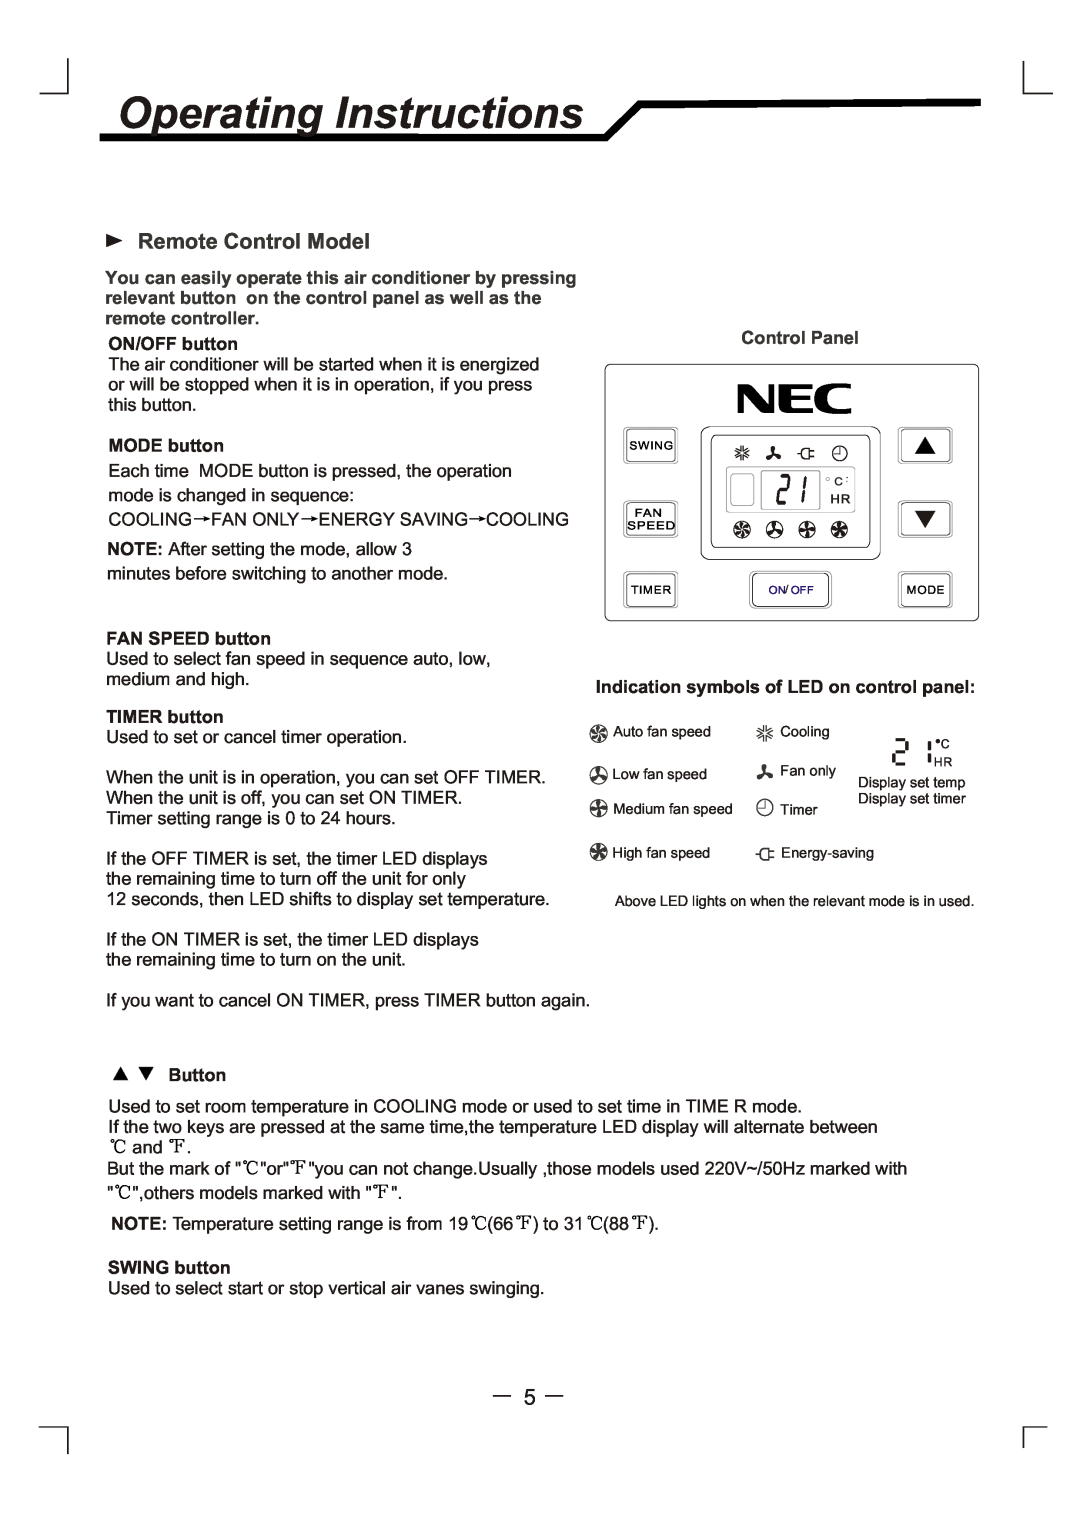 NEC RWC-3217 Operating Instructions, Remote Control Model, ON/OFF button, MODE button, FAN SPEED button, TIMER button 